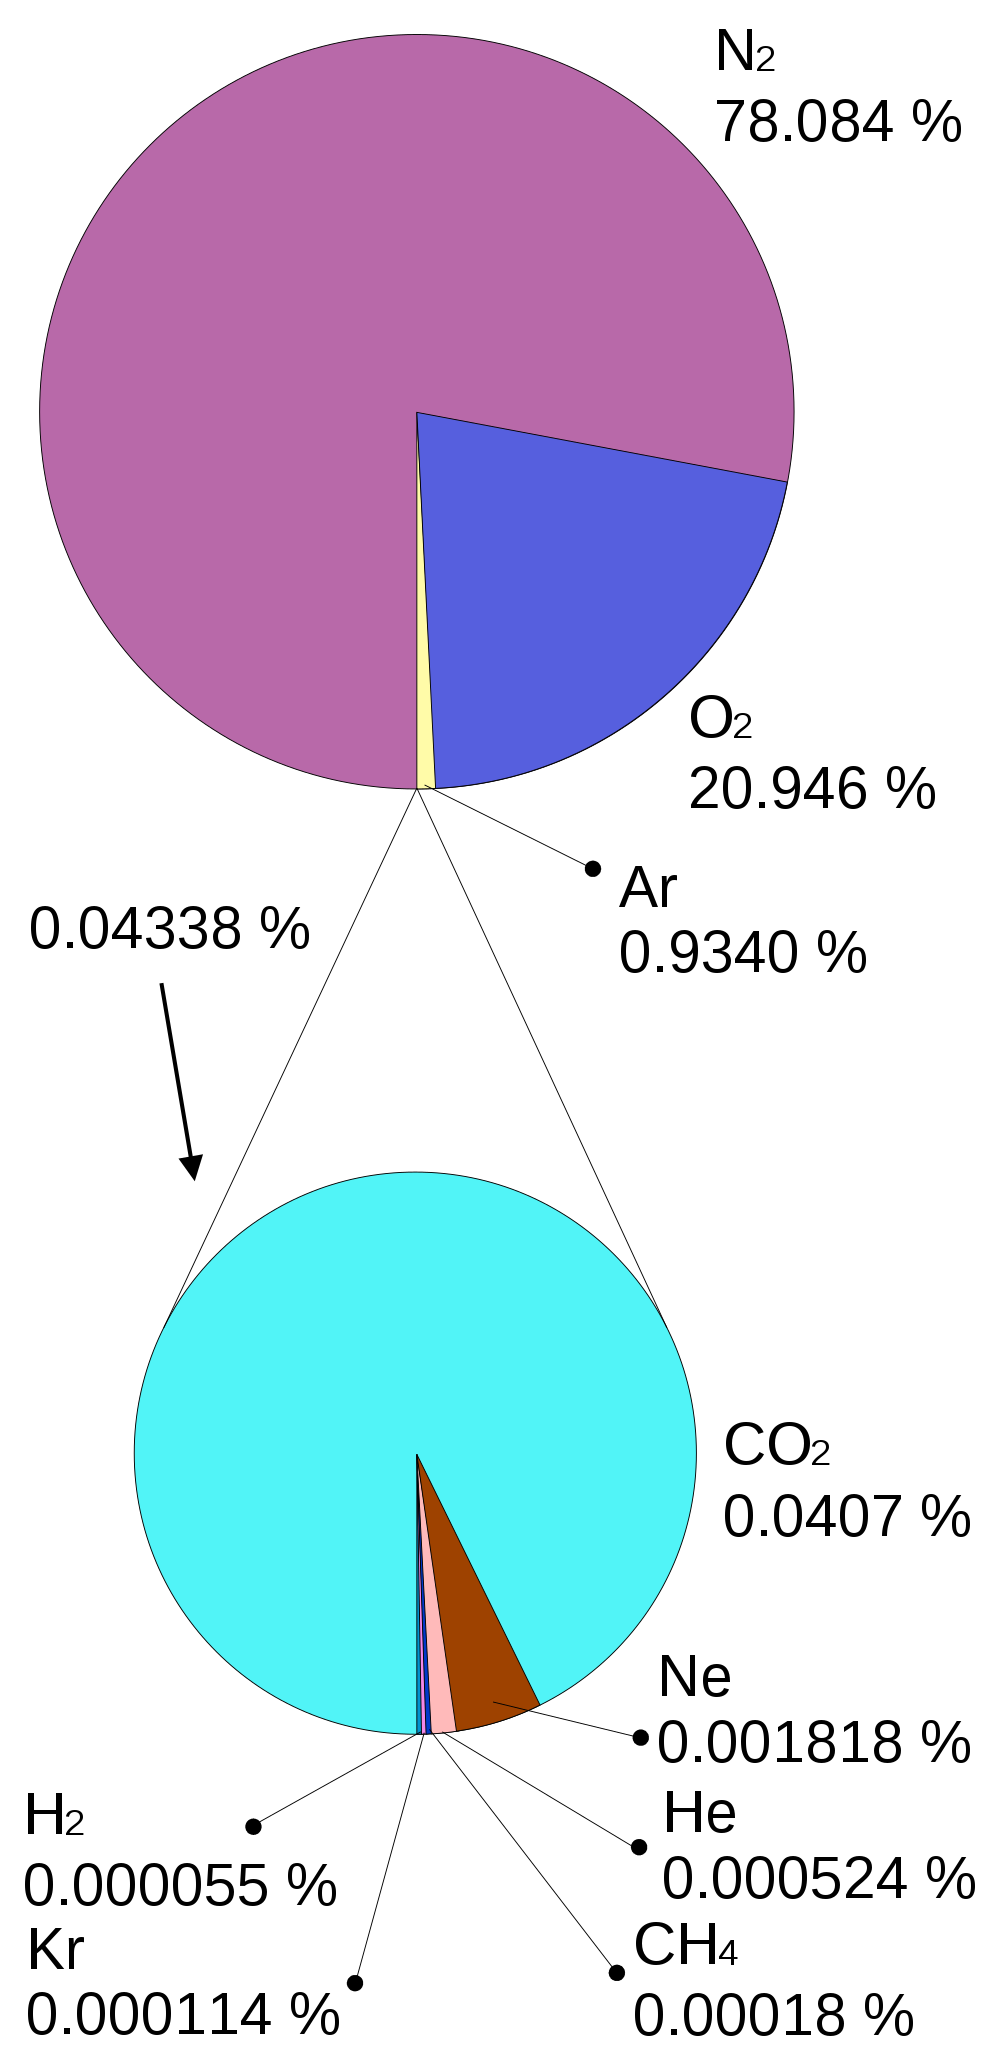 Composition of Earth's atmosphere by molecular count, excluding water vapor.